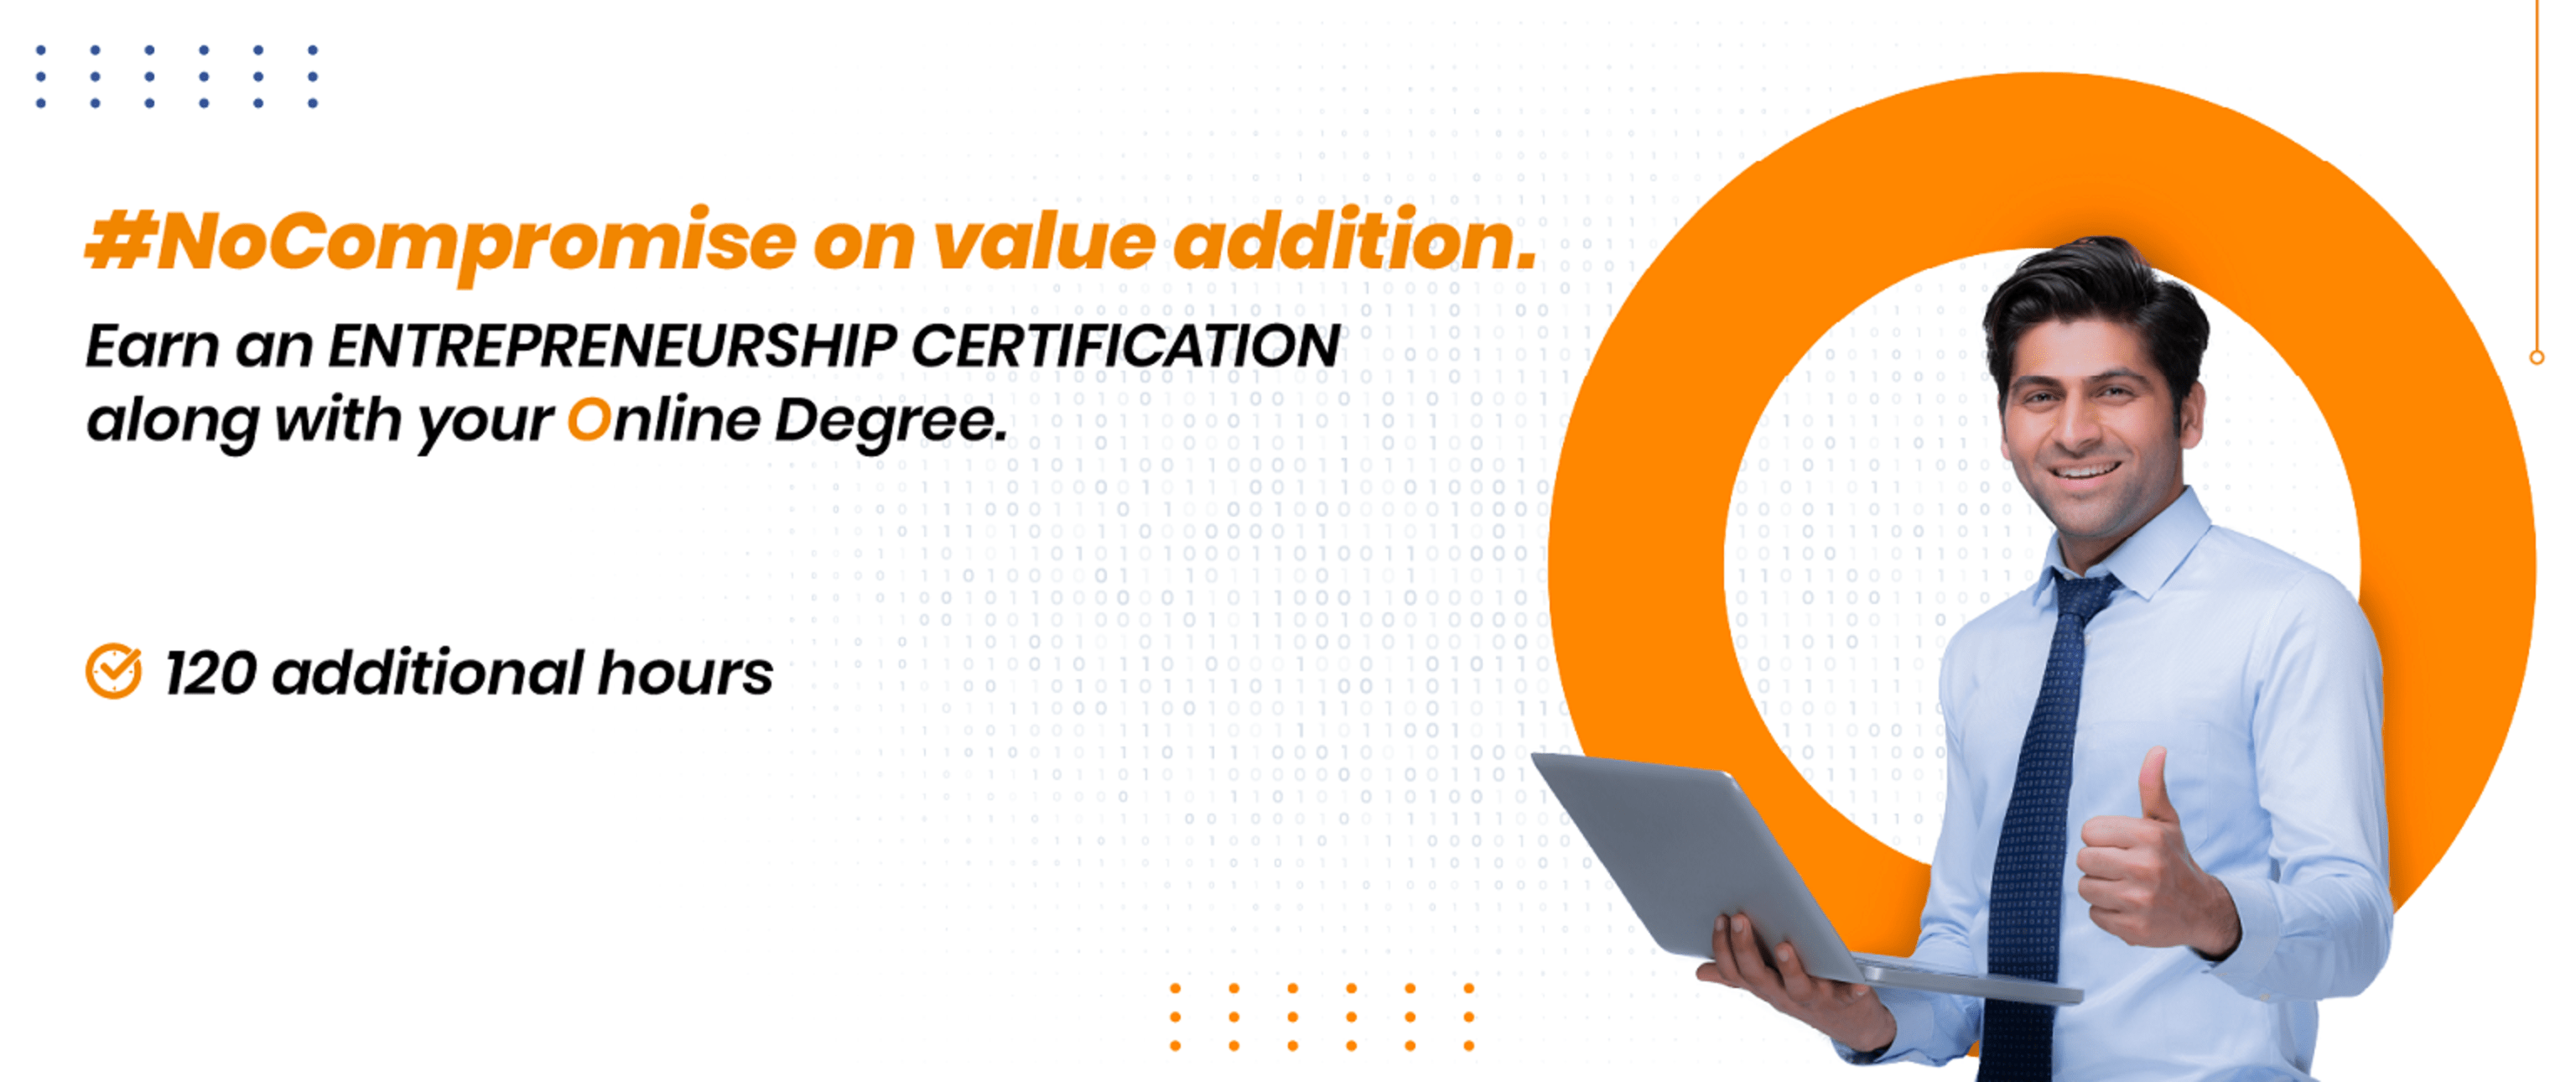 #NoCompromise on value addition.

Earn an ENTREPRENEURSHIP CERTIFICATION
along with your Online Degree.

J 120 additional hours